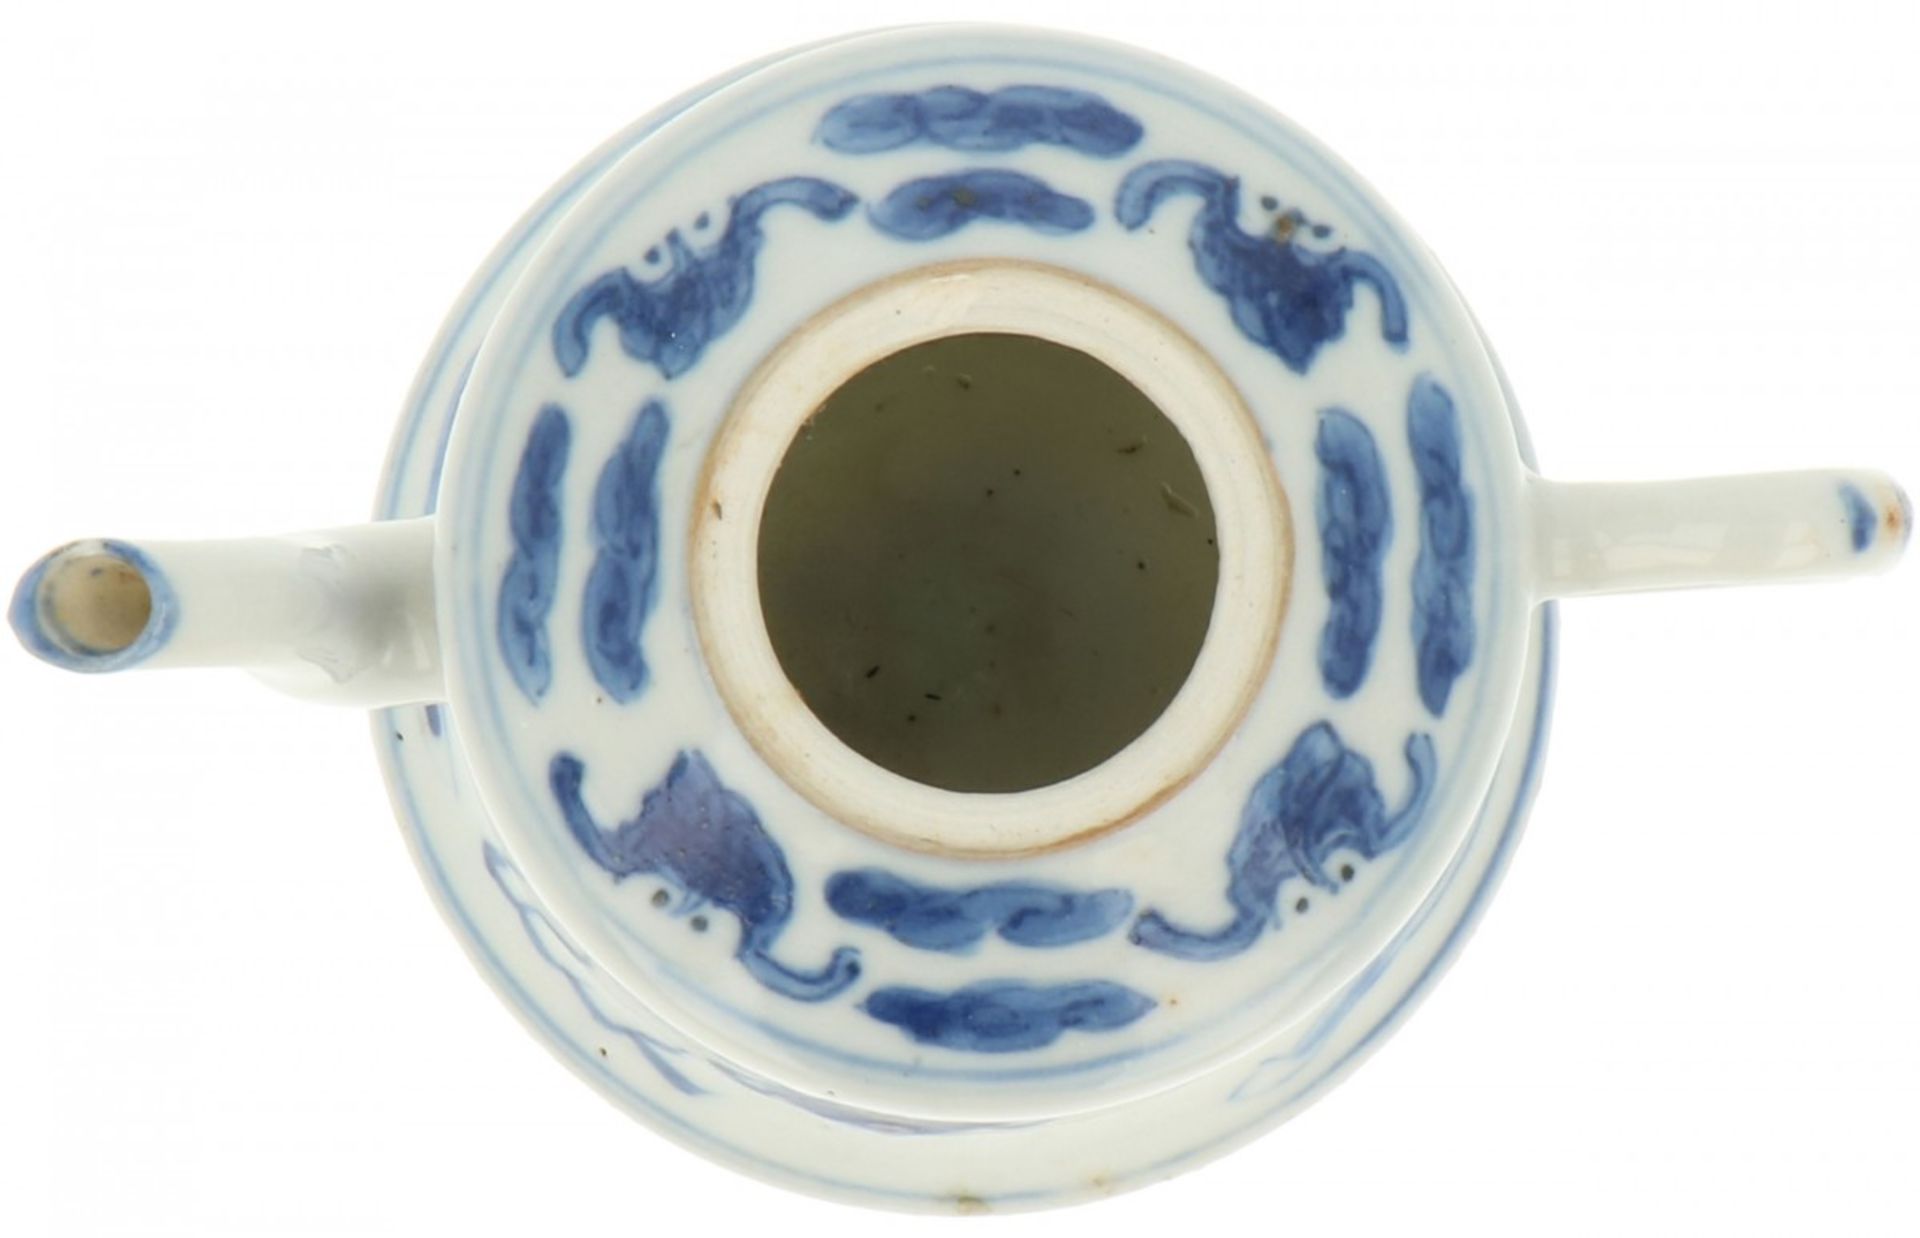 A porcelain teapot with Foo-dogs décor, marked Kangxi. China, 19th century. - Image 6 of 7